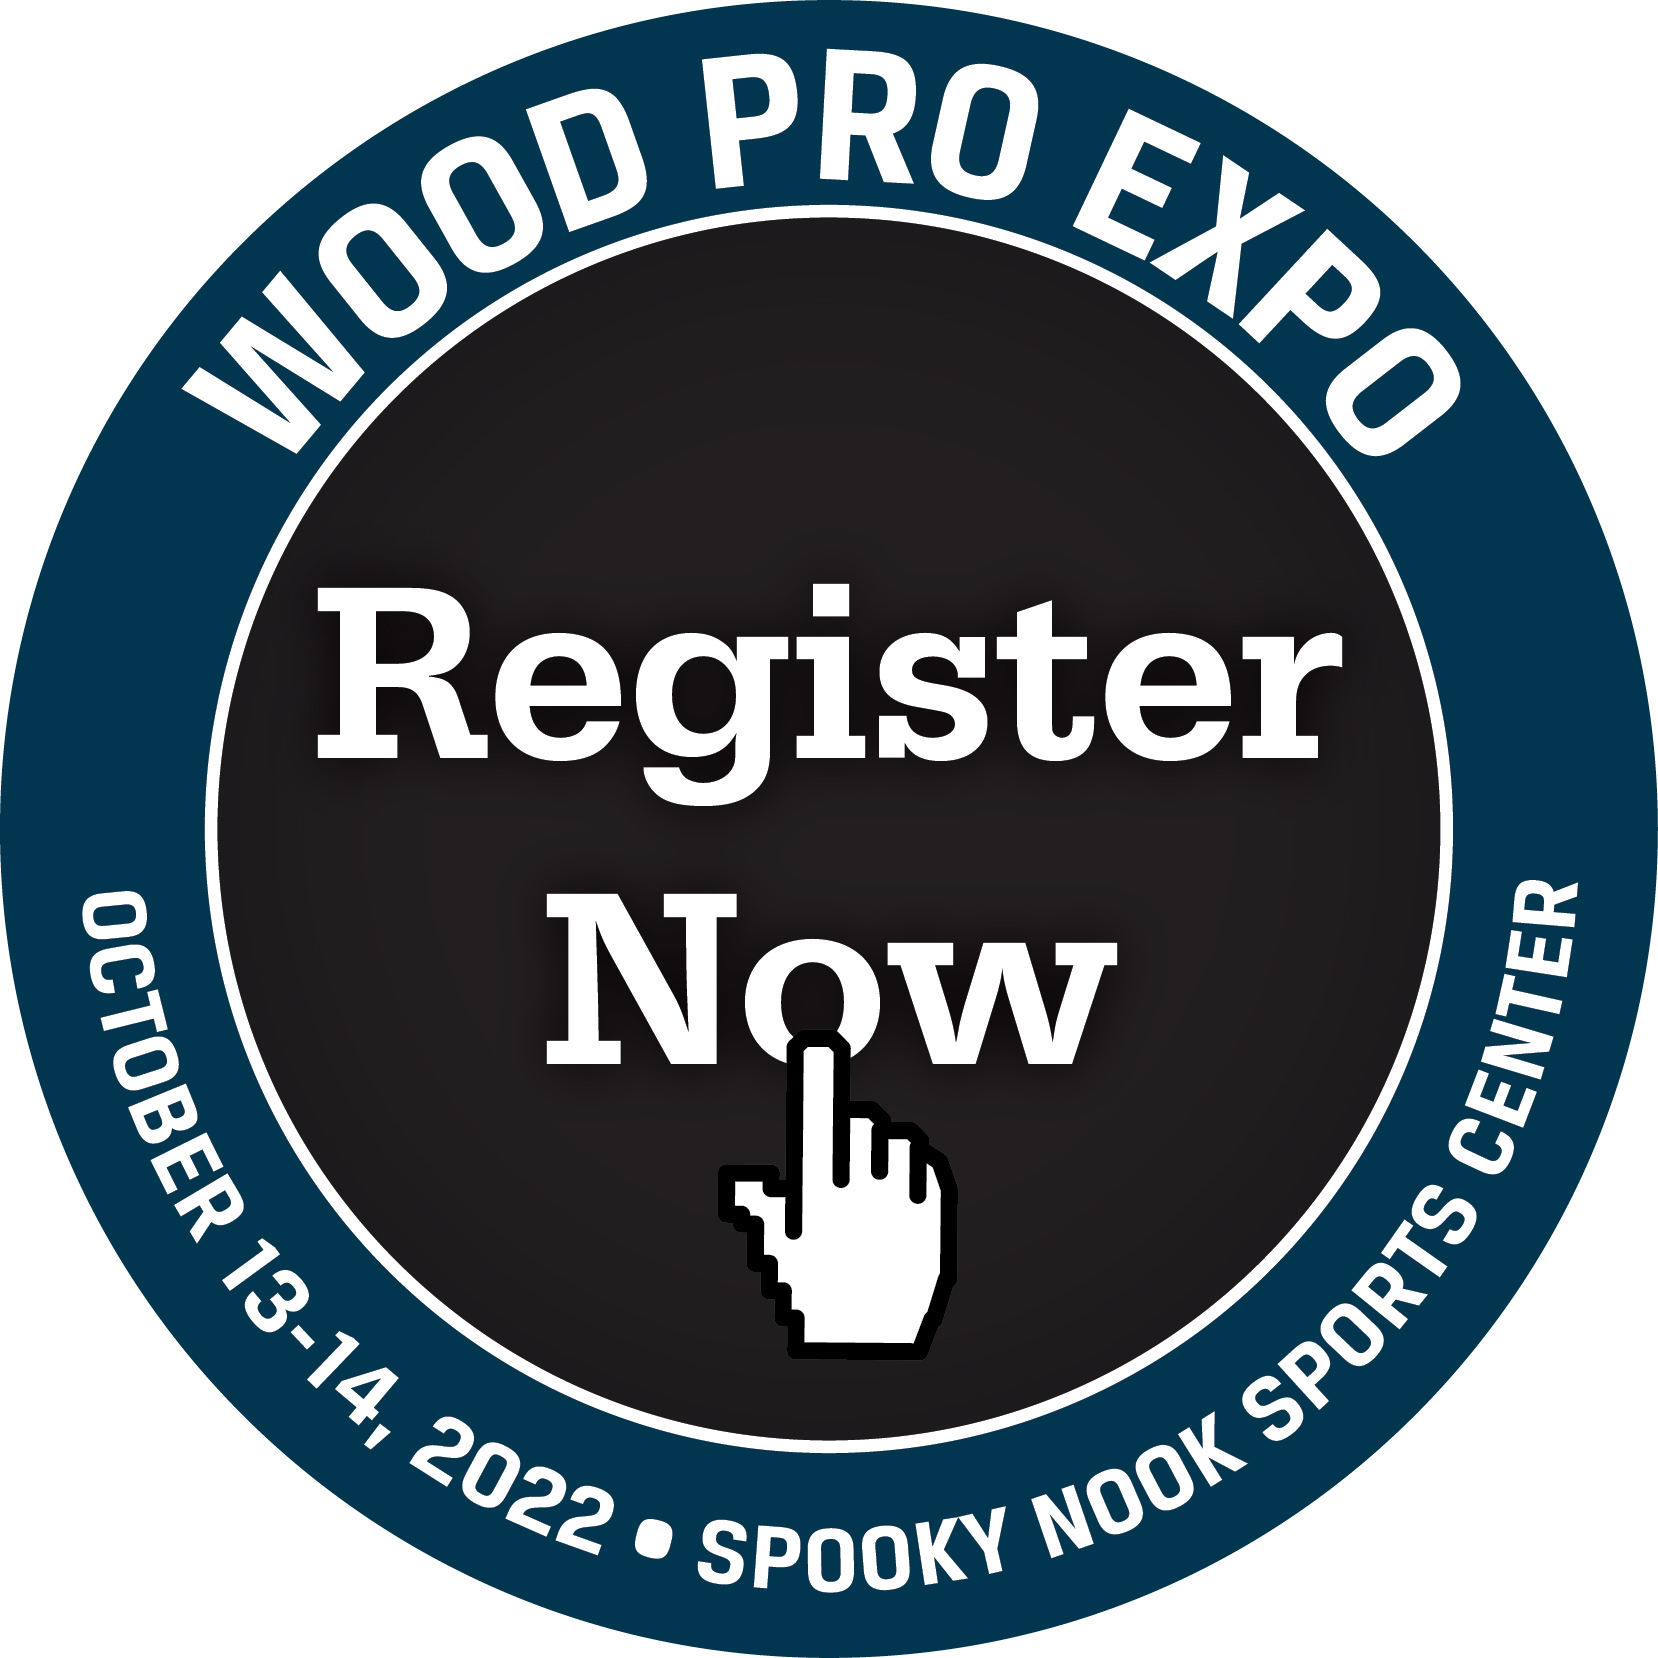 Wood Pro Expo Registration Button